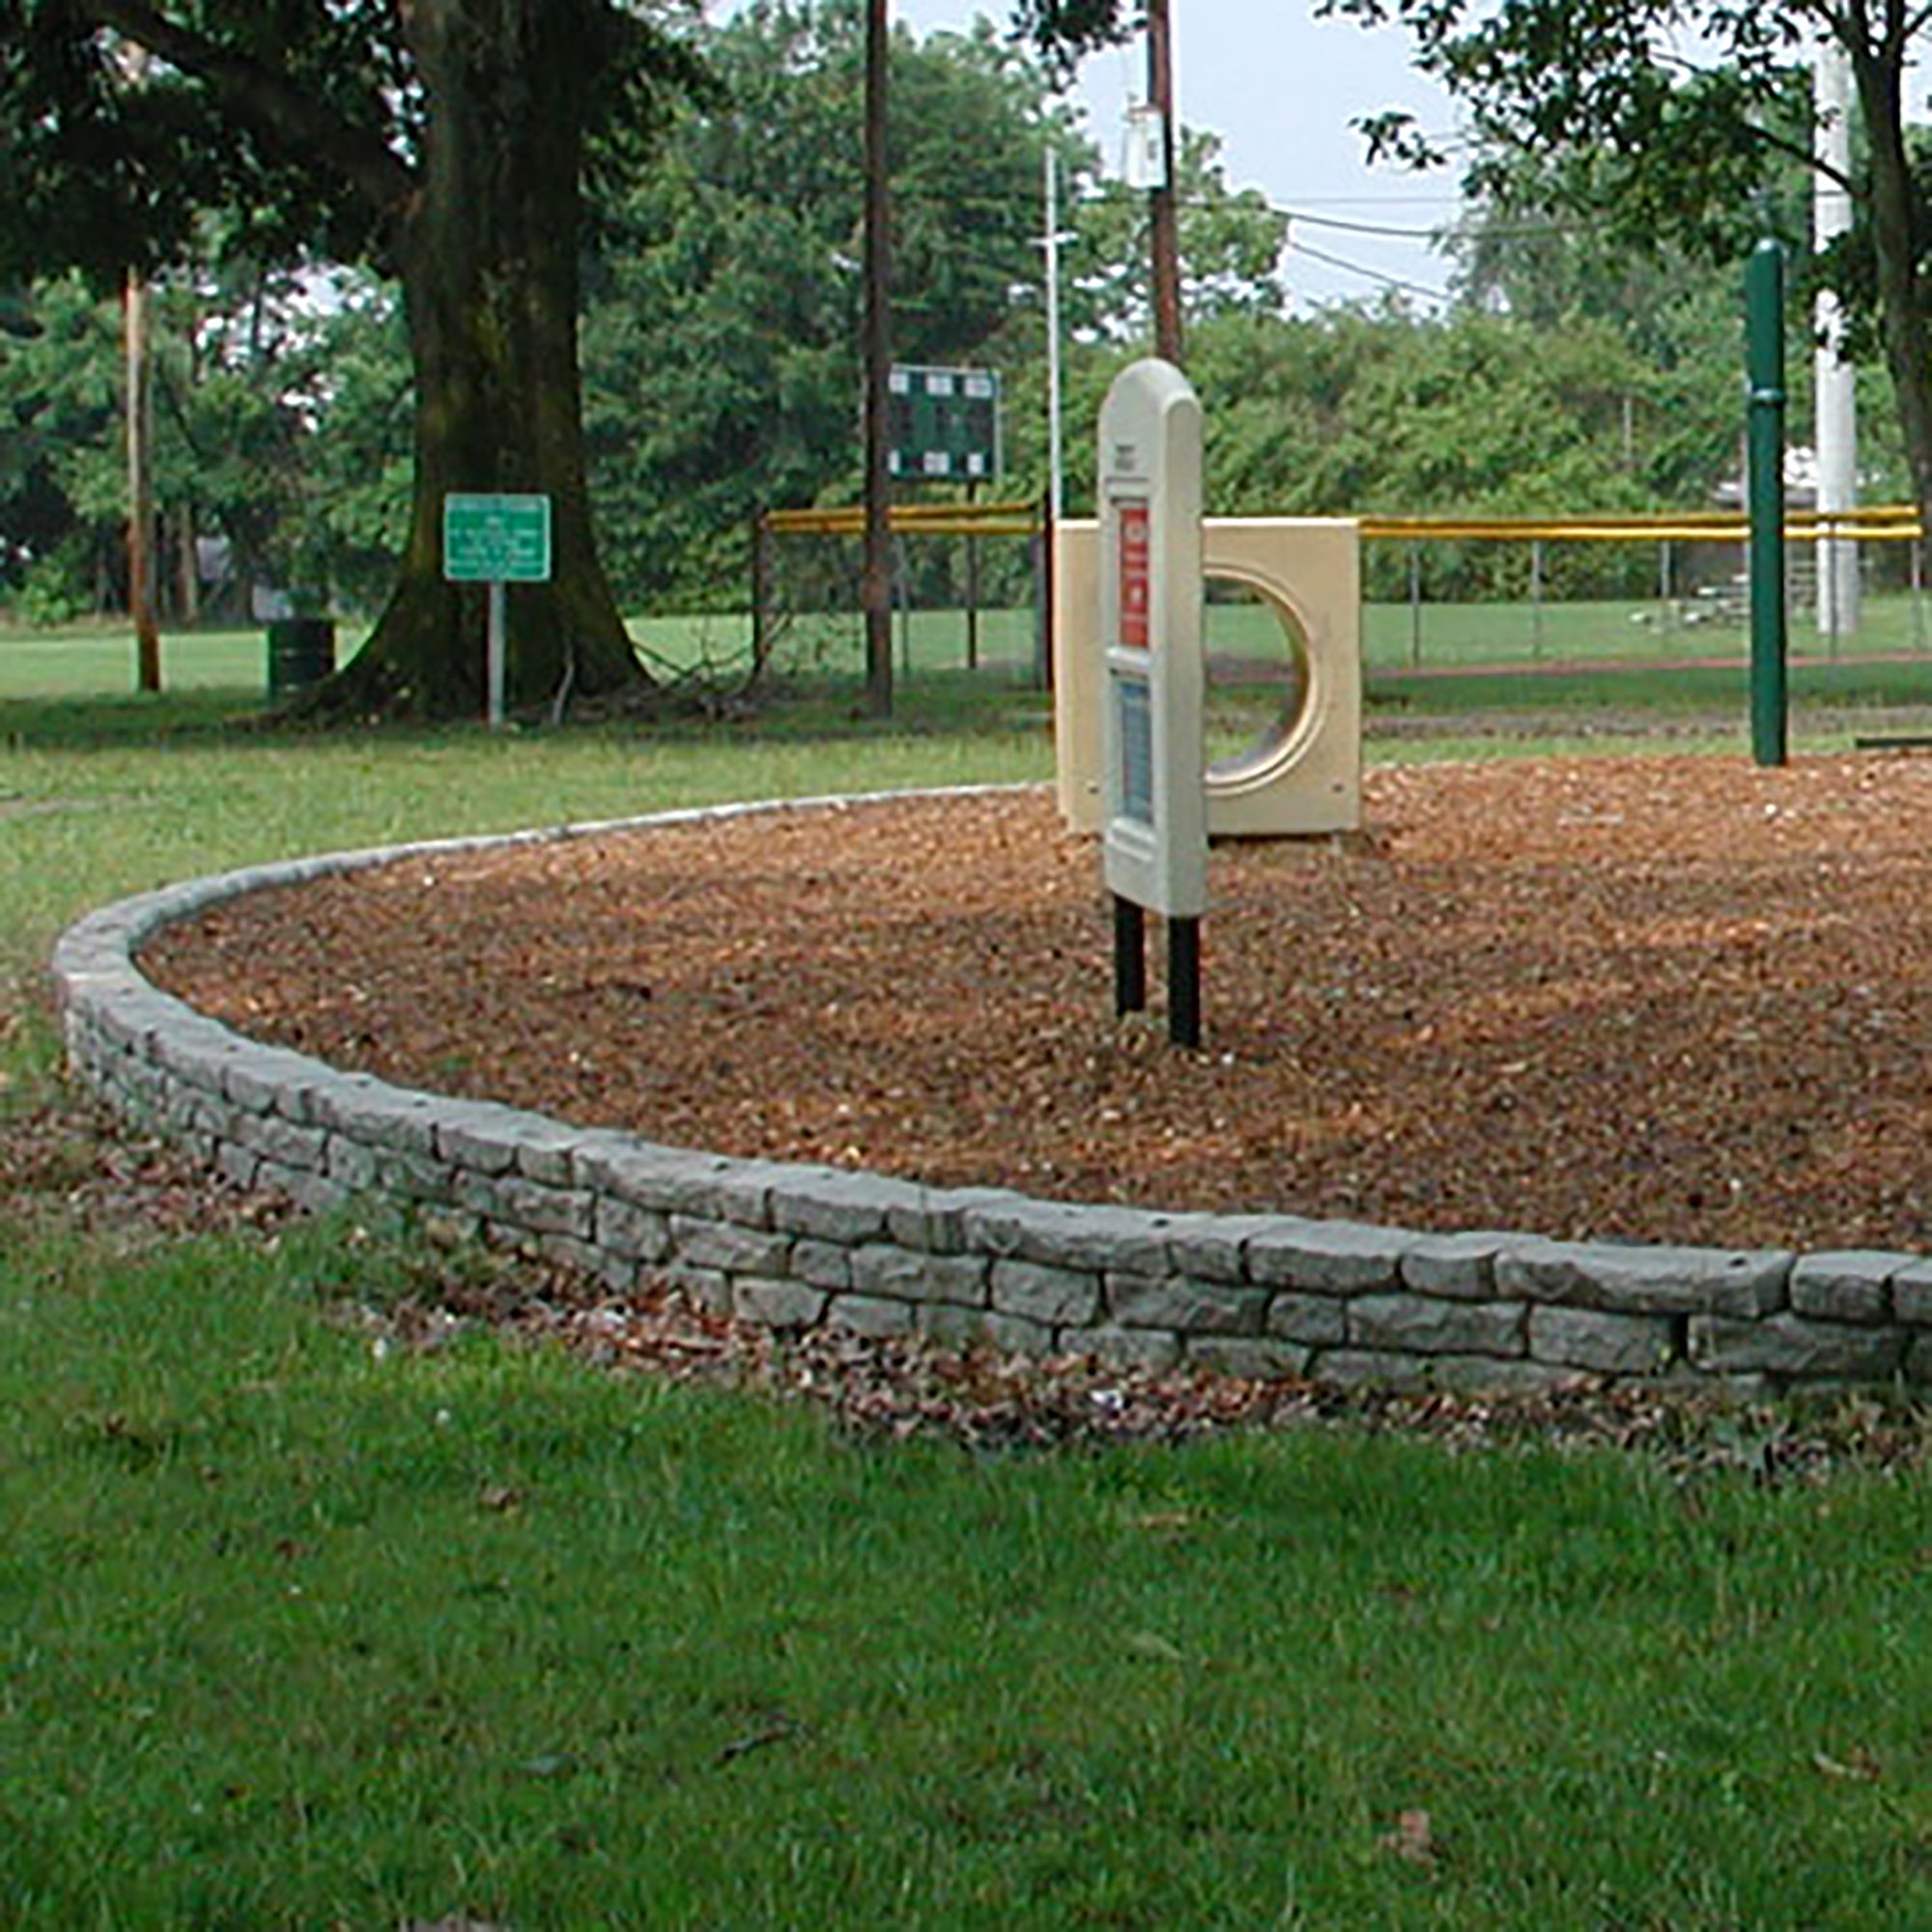 Curved and straight rock lock assembled together to make a border around playground